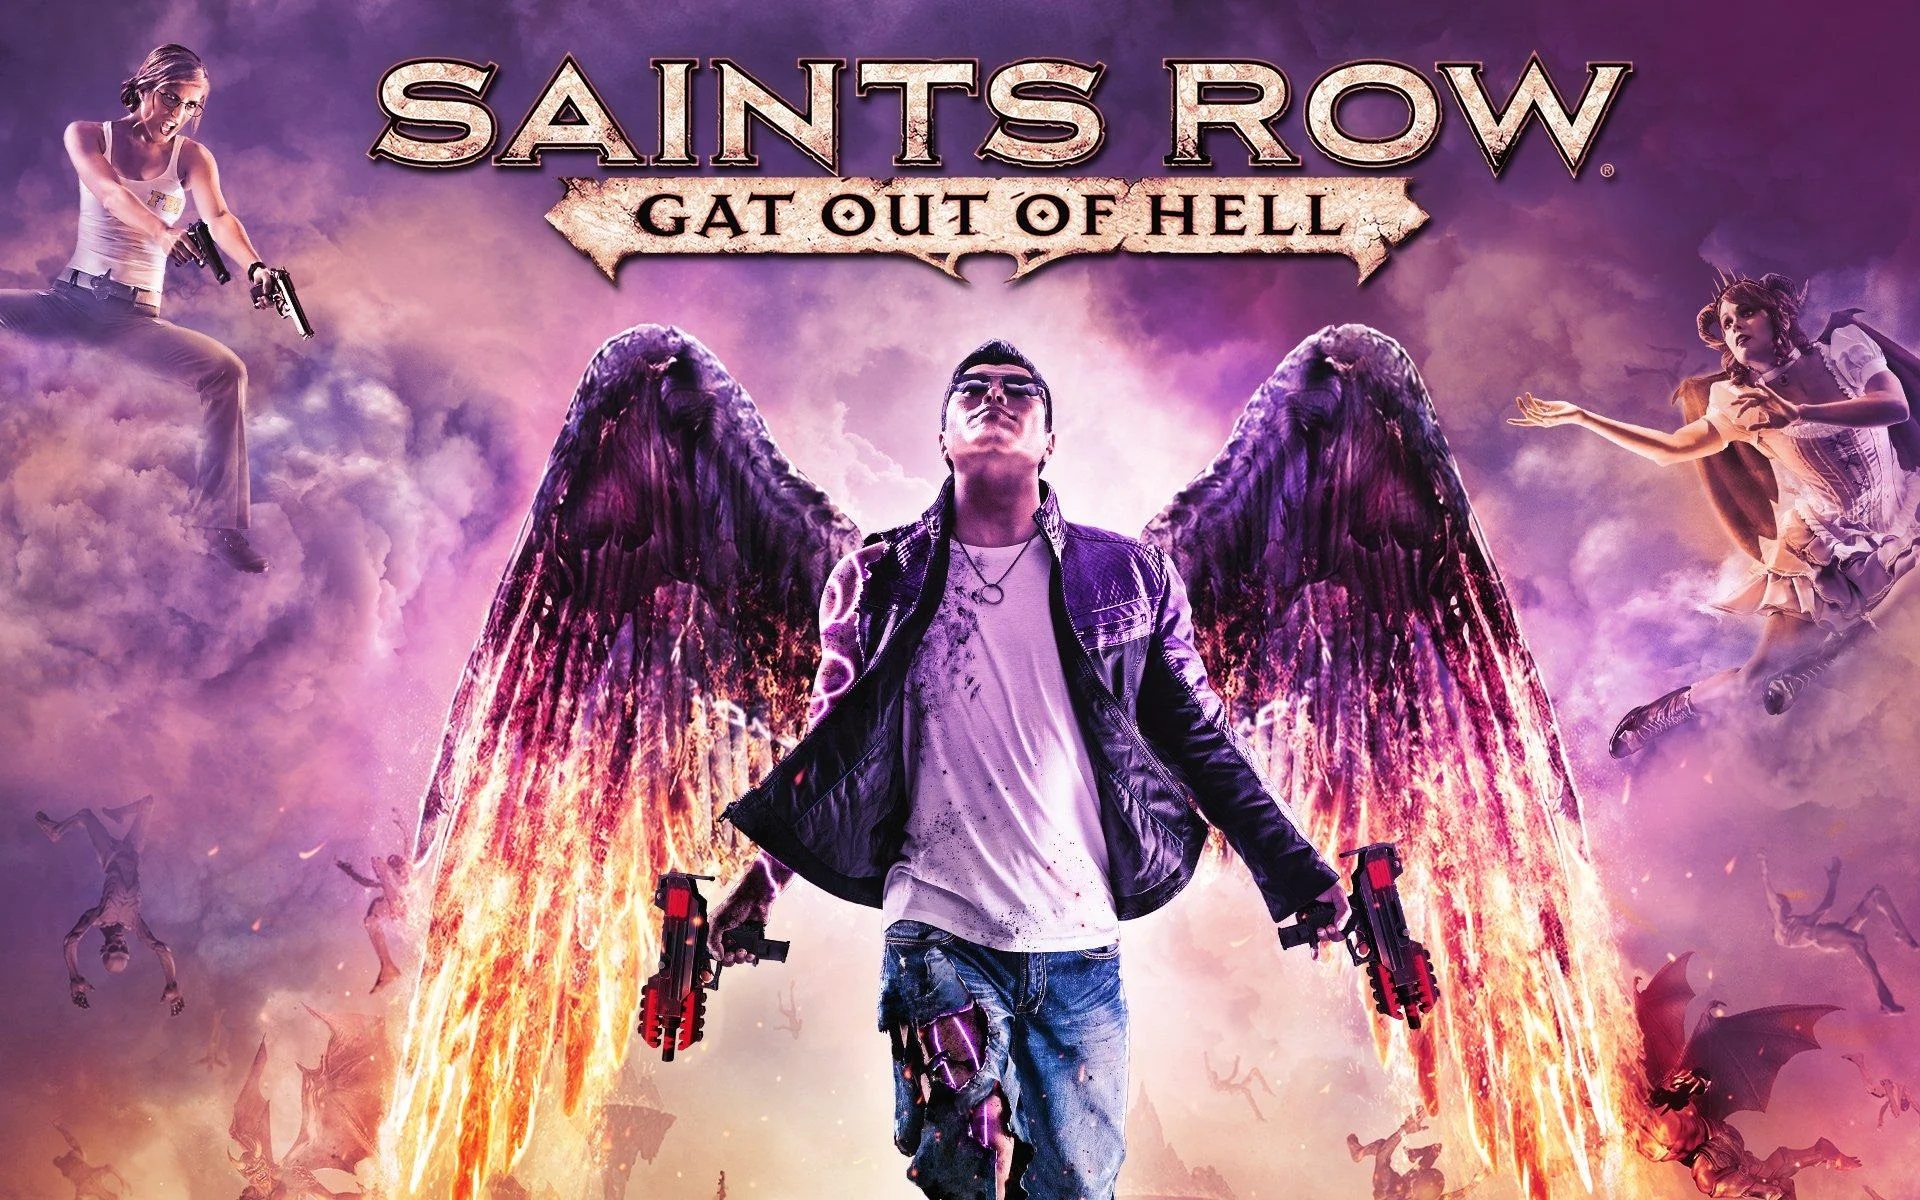 Saints row get out of hell steam фото 10